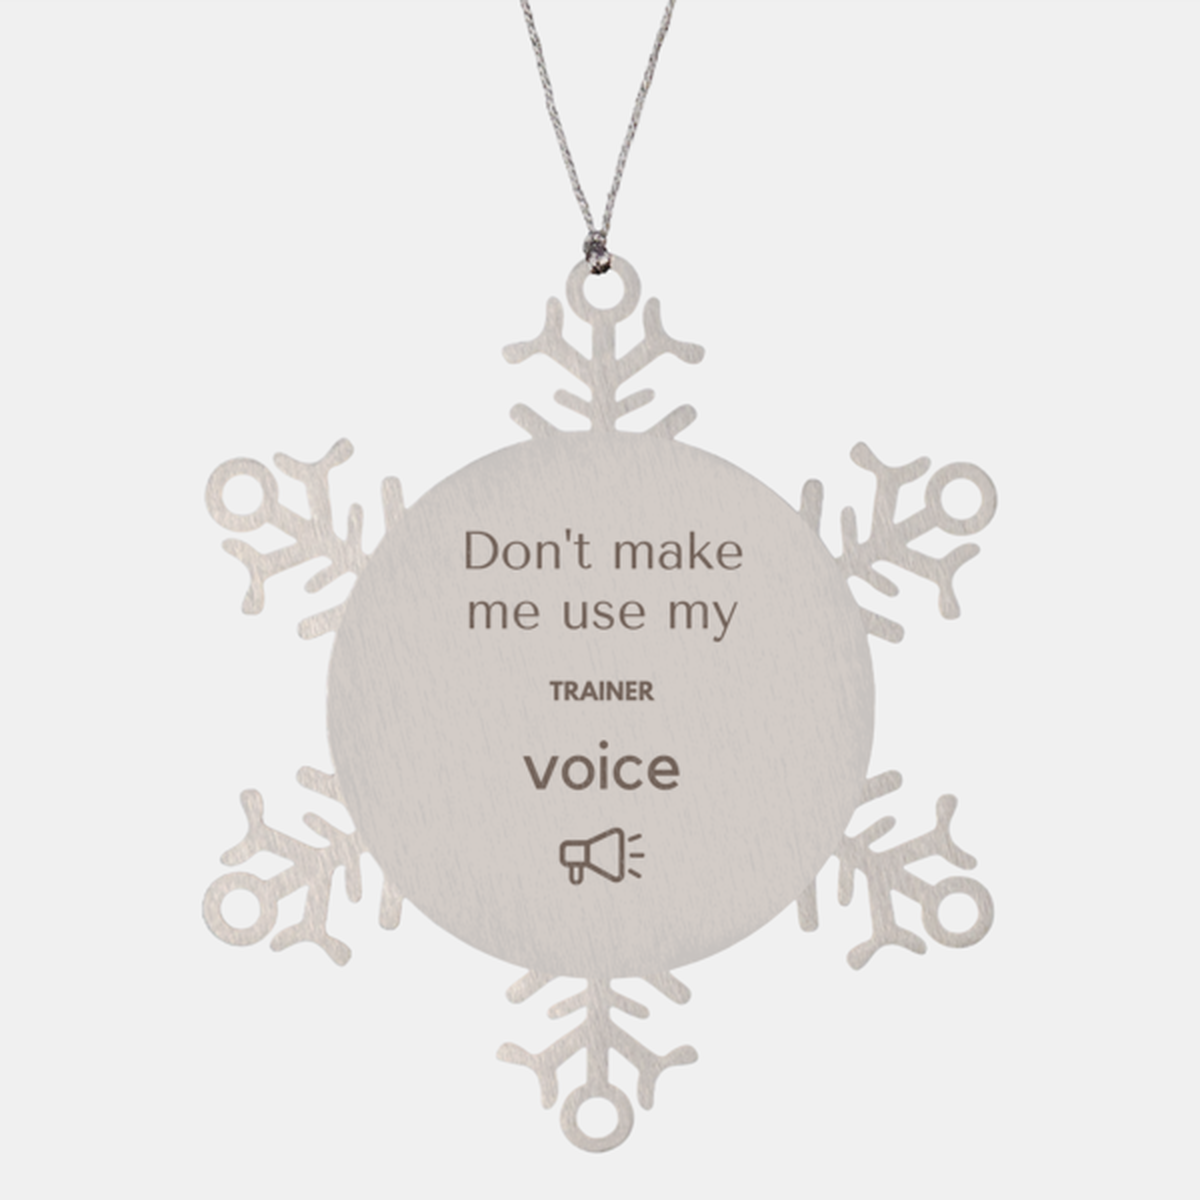 Don't make me use my Trainer voice, Sarcasm Trainer Ornament Gifts, Christmas Trainer Snowflake Ornament Unique Gifts For Trainer Coworkers, Men, Women, Colleague, Friends